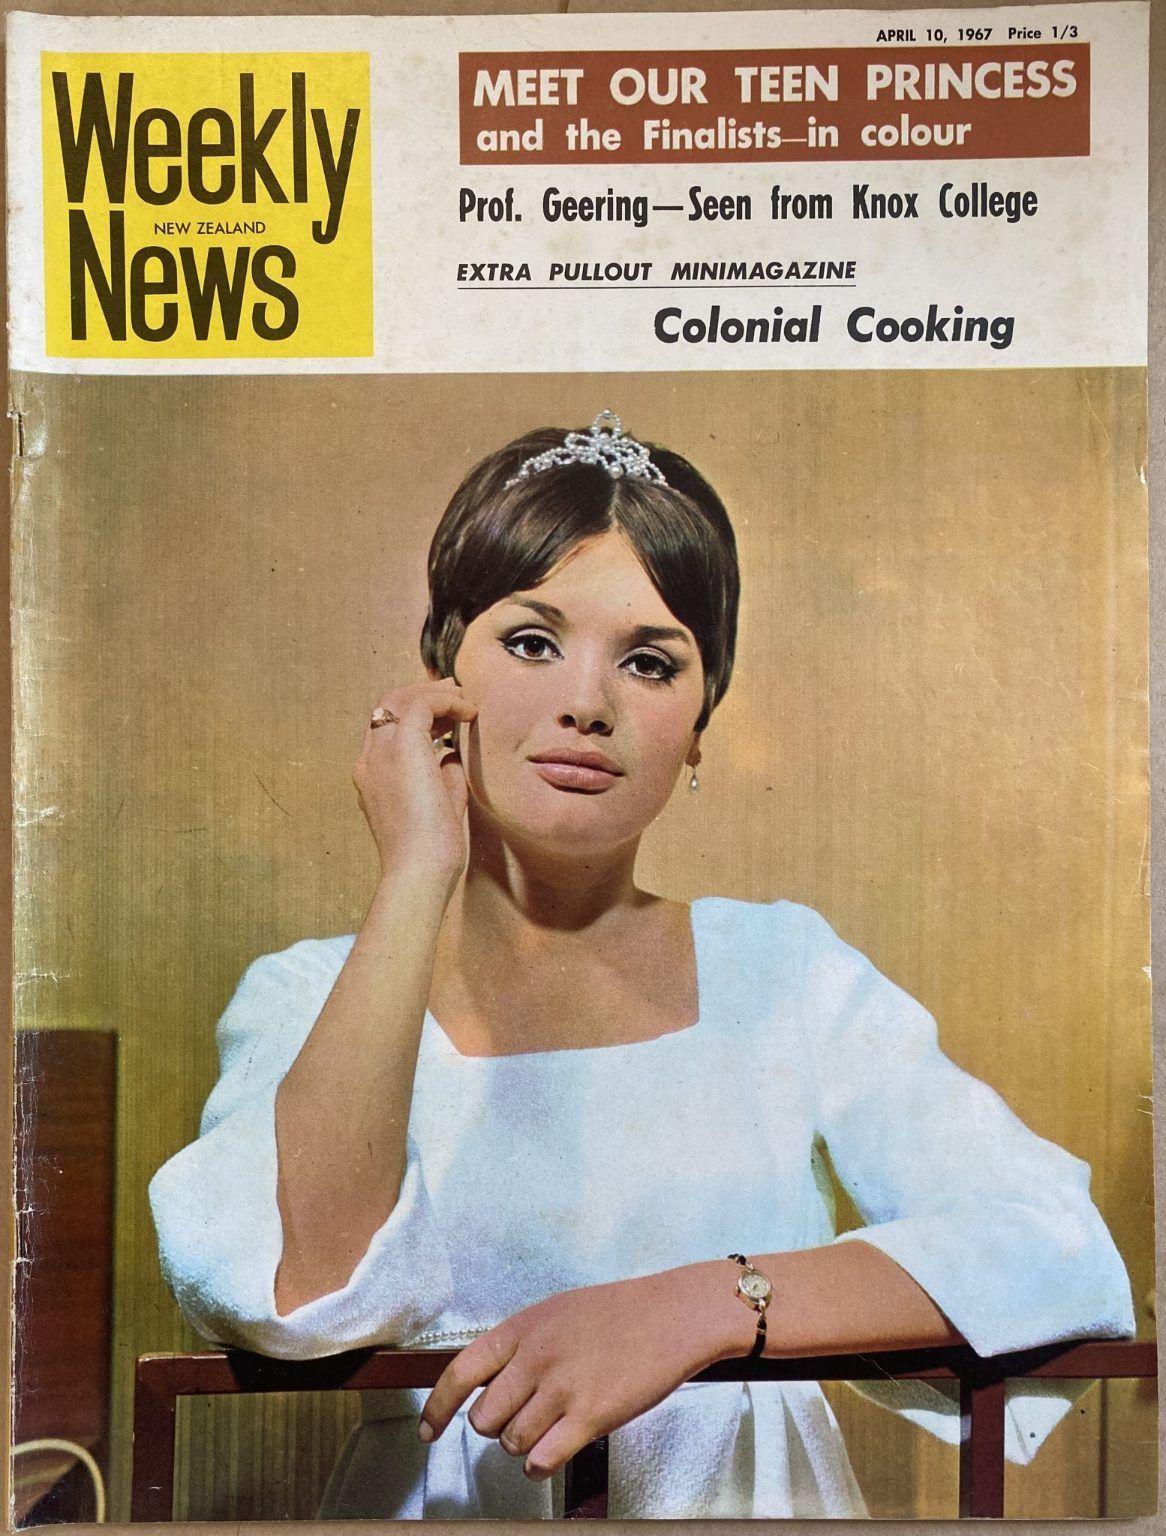 OLD NEWSPAPER: New Zealand Weekly News, No. 5393, 10 April 1967